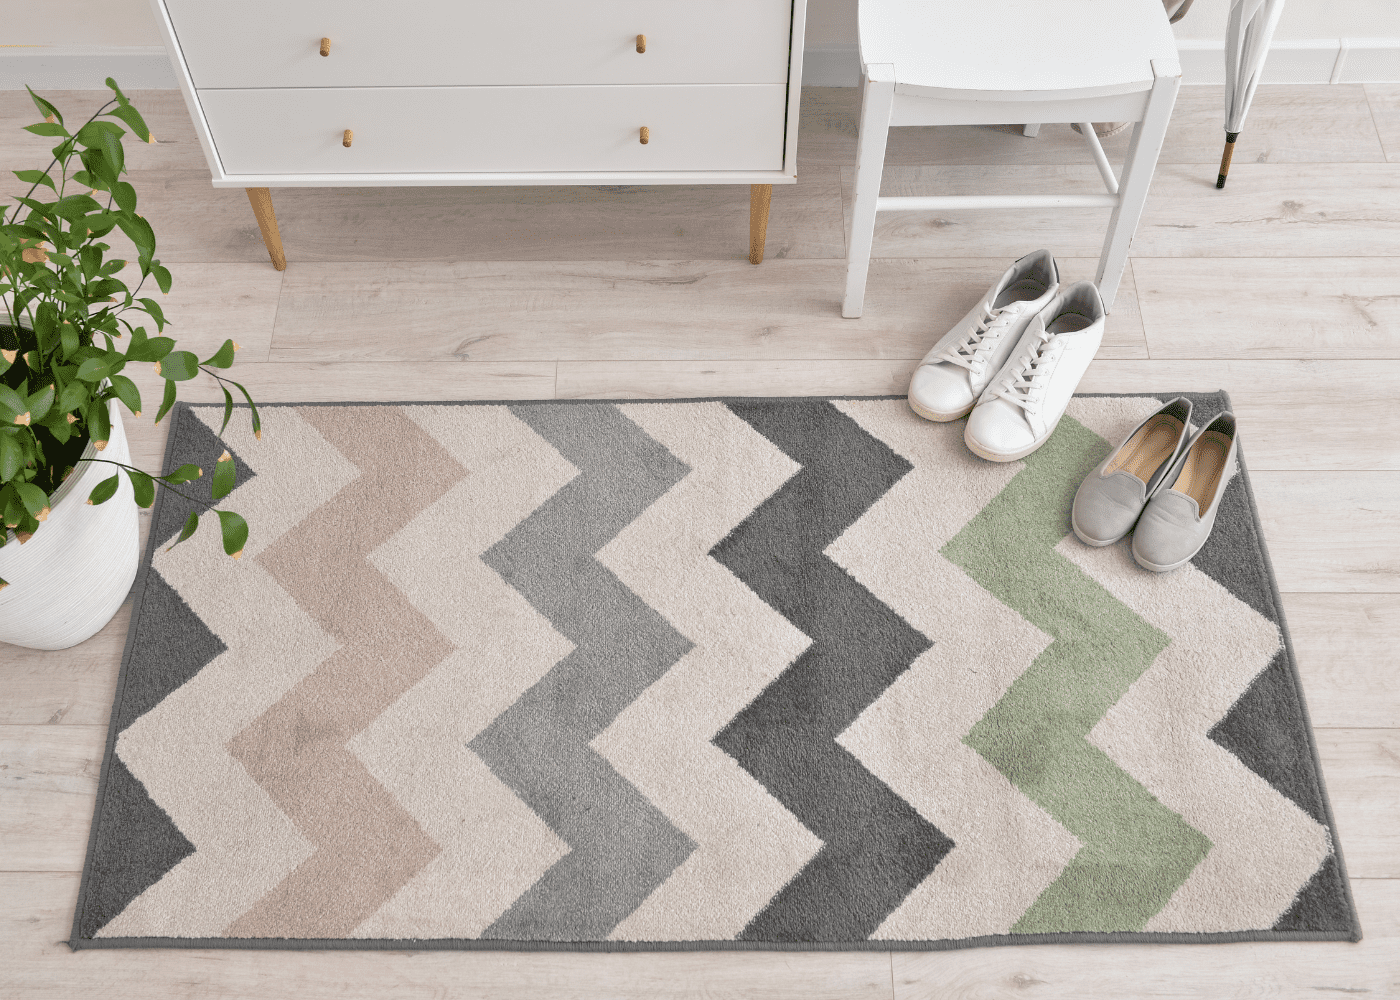 A chevron style rug with pastel pink green and grey colors.